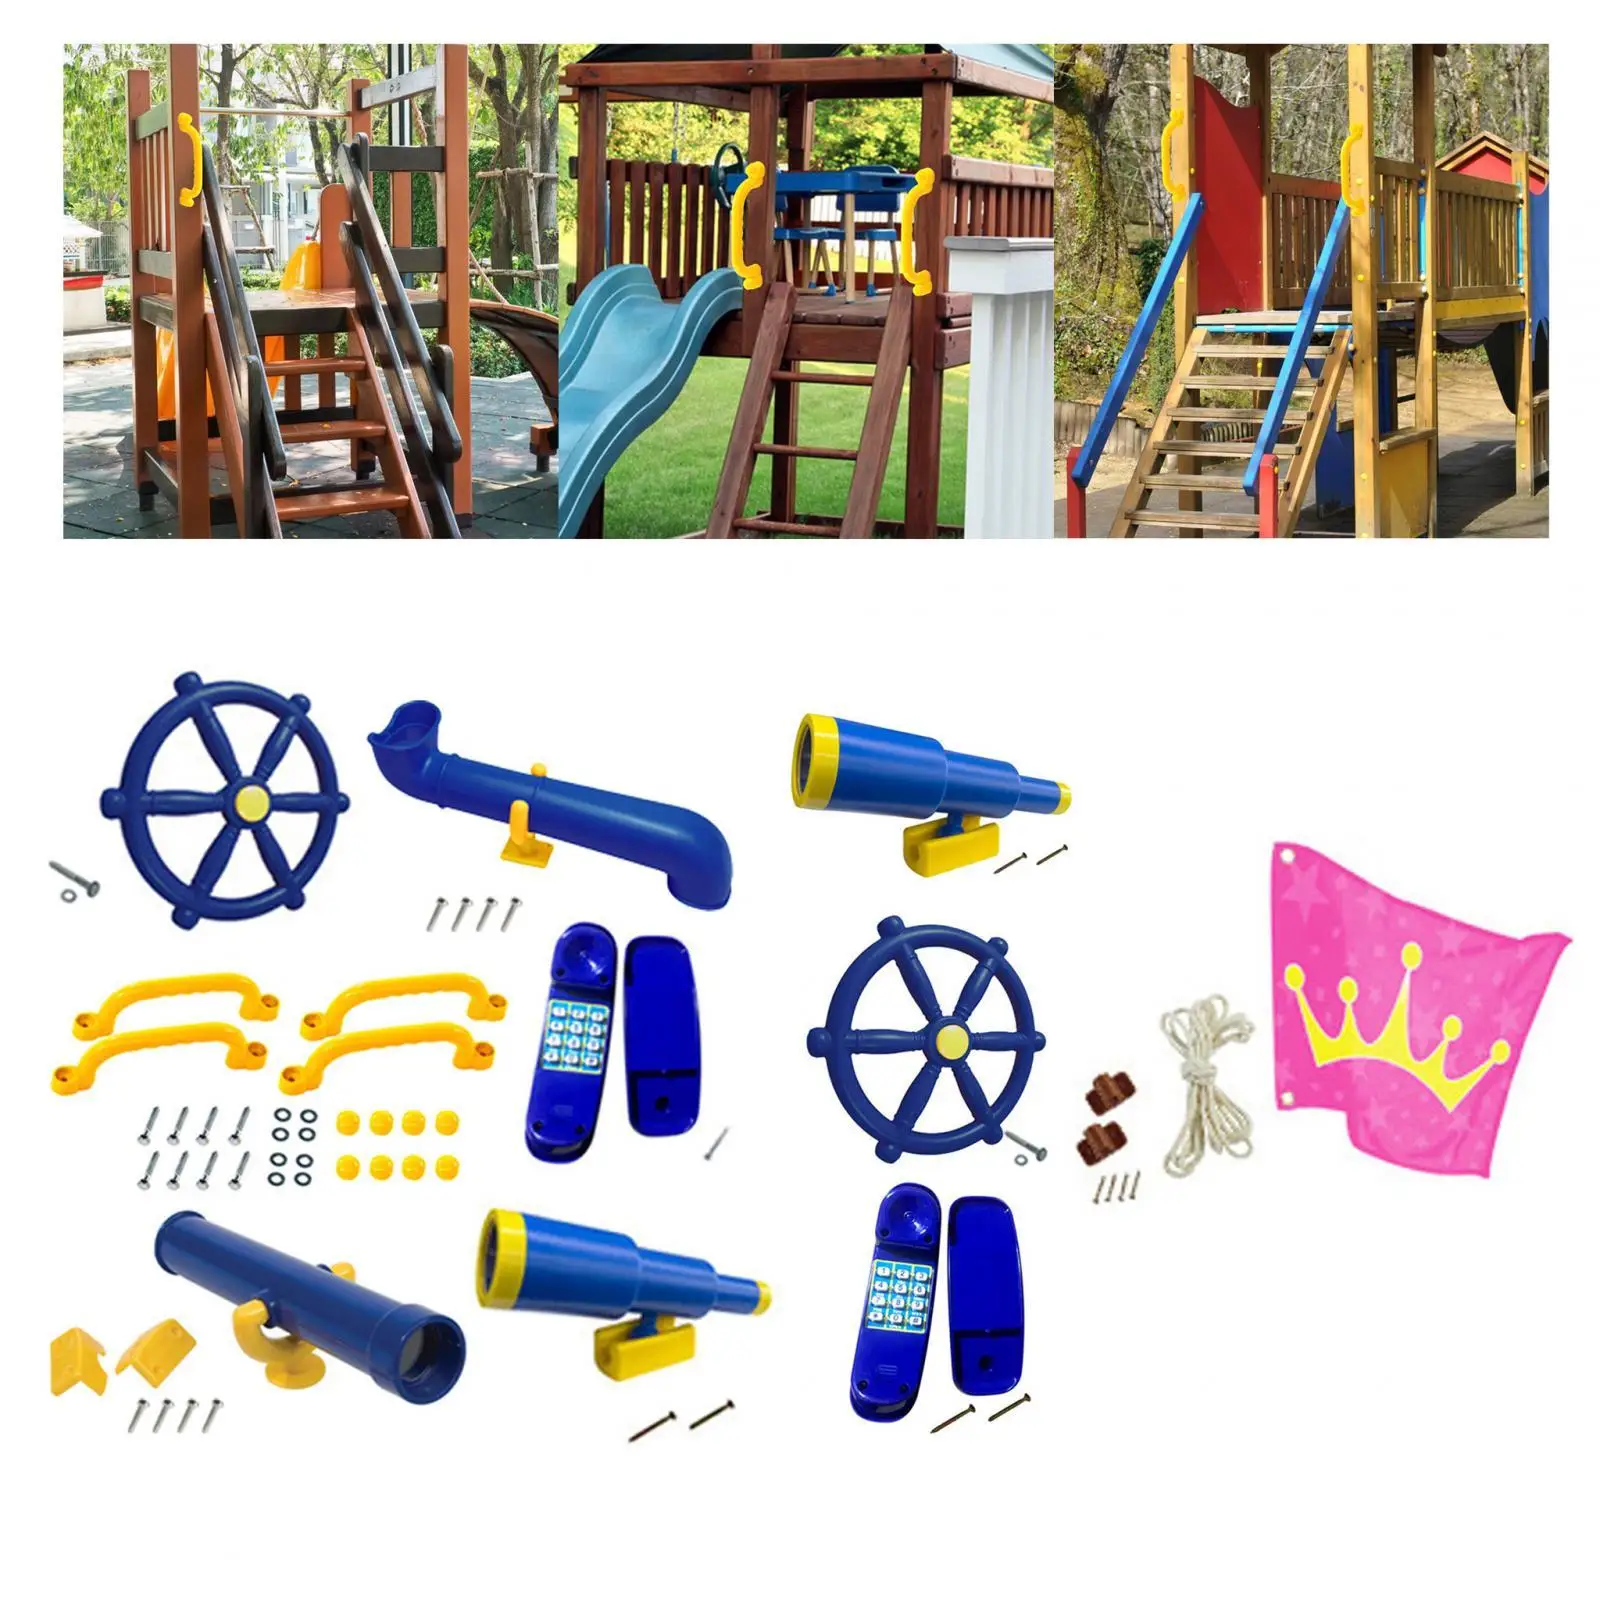 Playground Equipment Swingset Attachments for Backyard Treehouse Playhouse